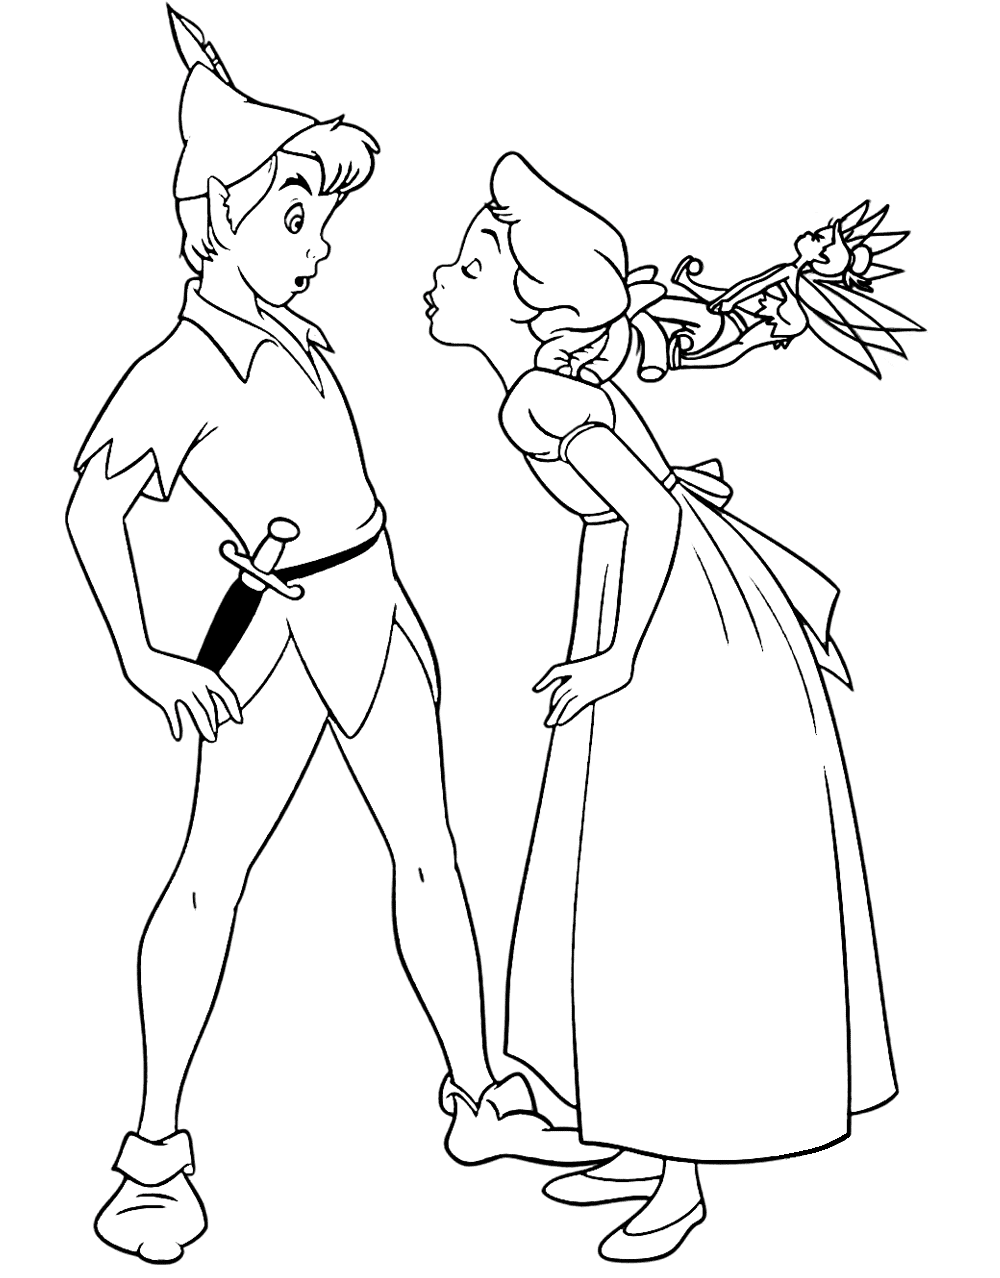 Peter Pan, Wendy and Tinker Bell Coloring Pages